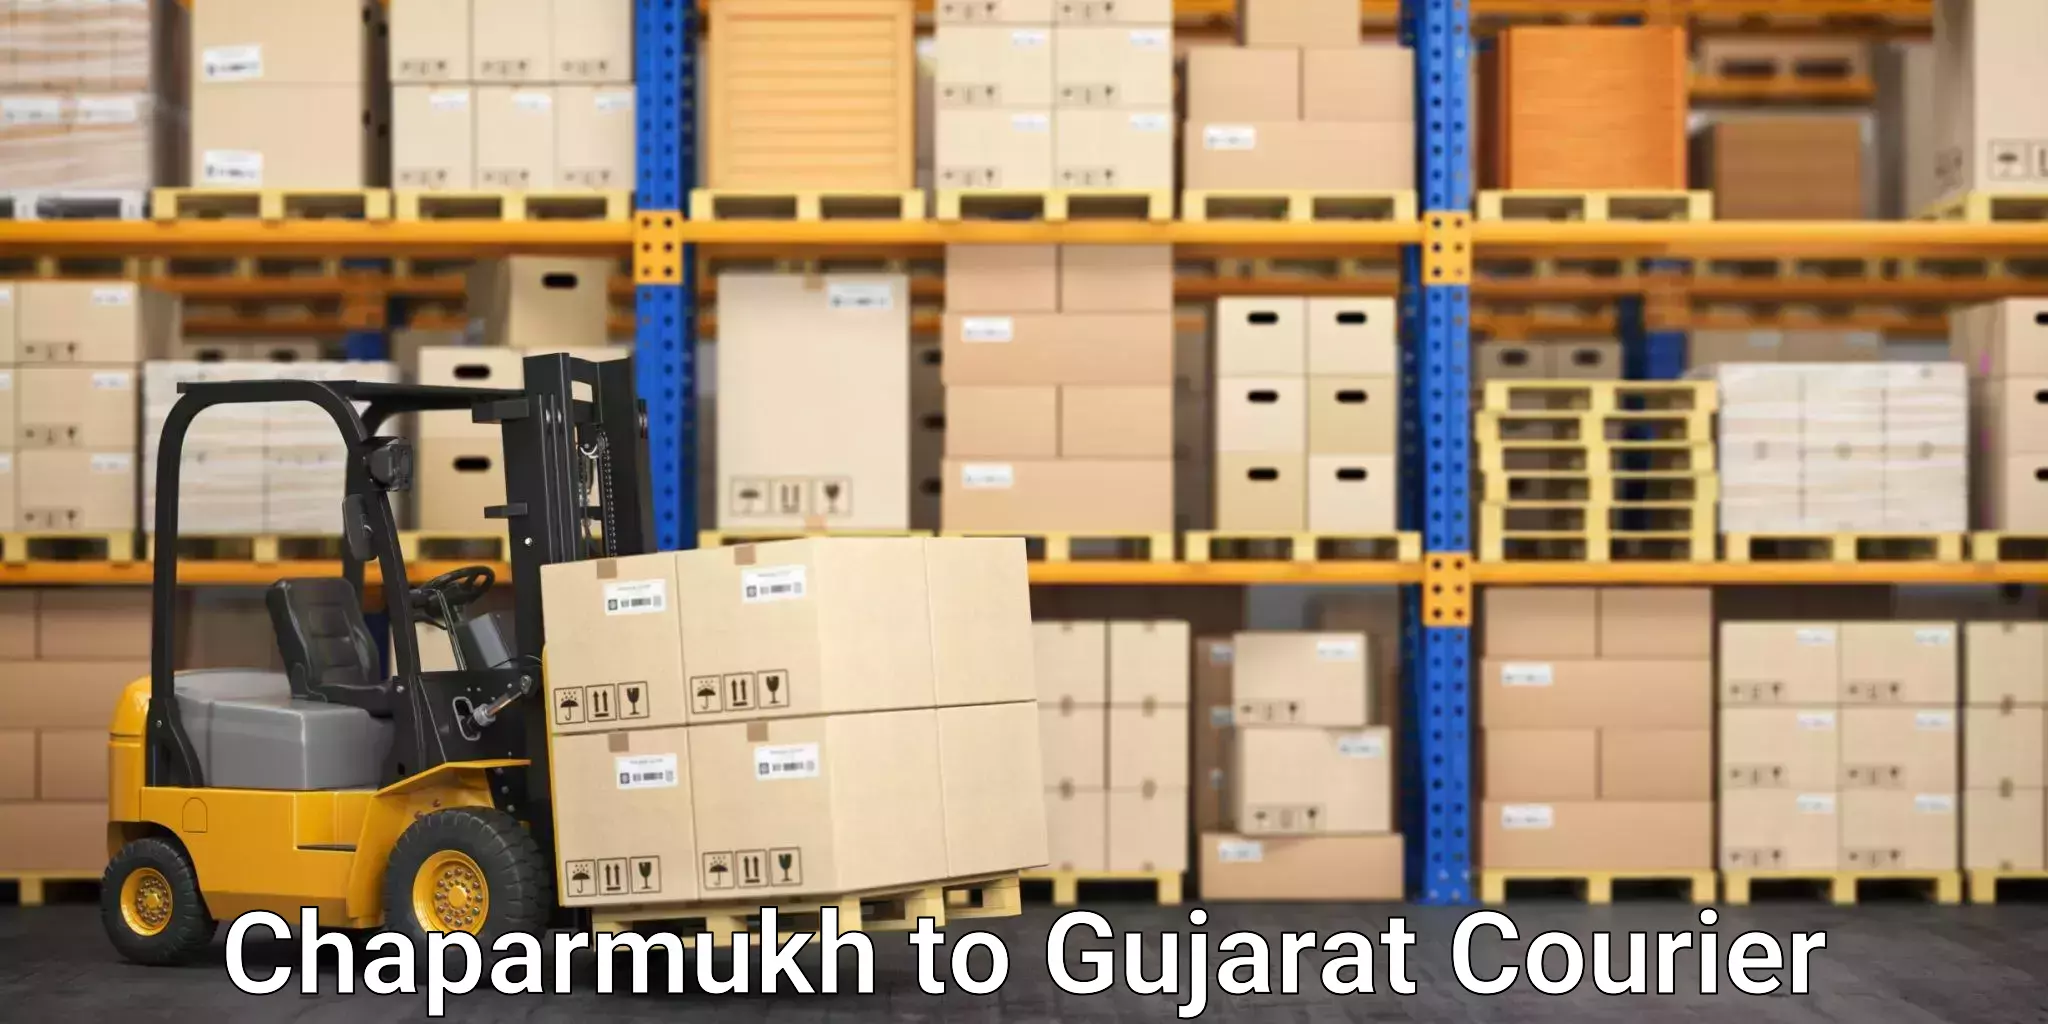 Air courier services Chaparmukh to Bharuch